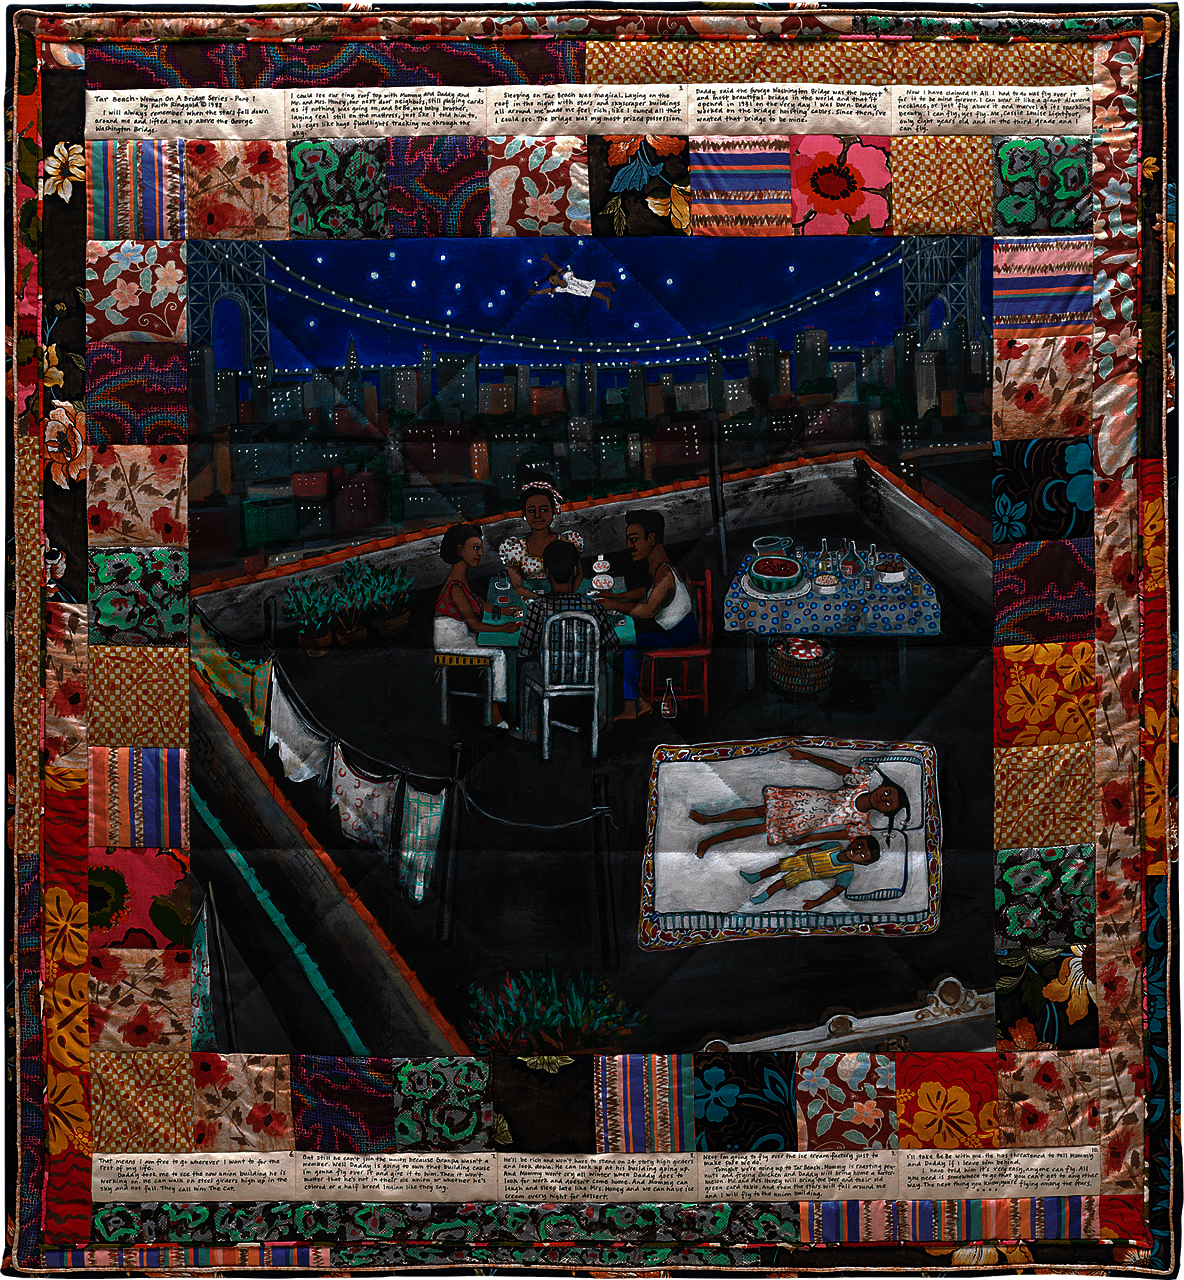 Colorful painting on fabric depicting the inscribed story of Cassie Louise Lightfoot, who flies over the George Washington Bridge